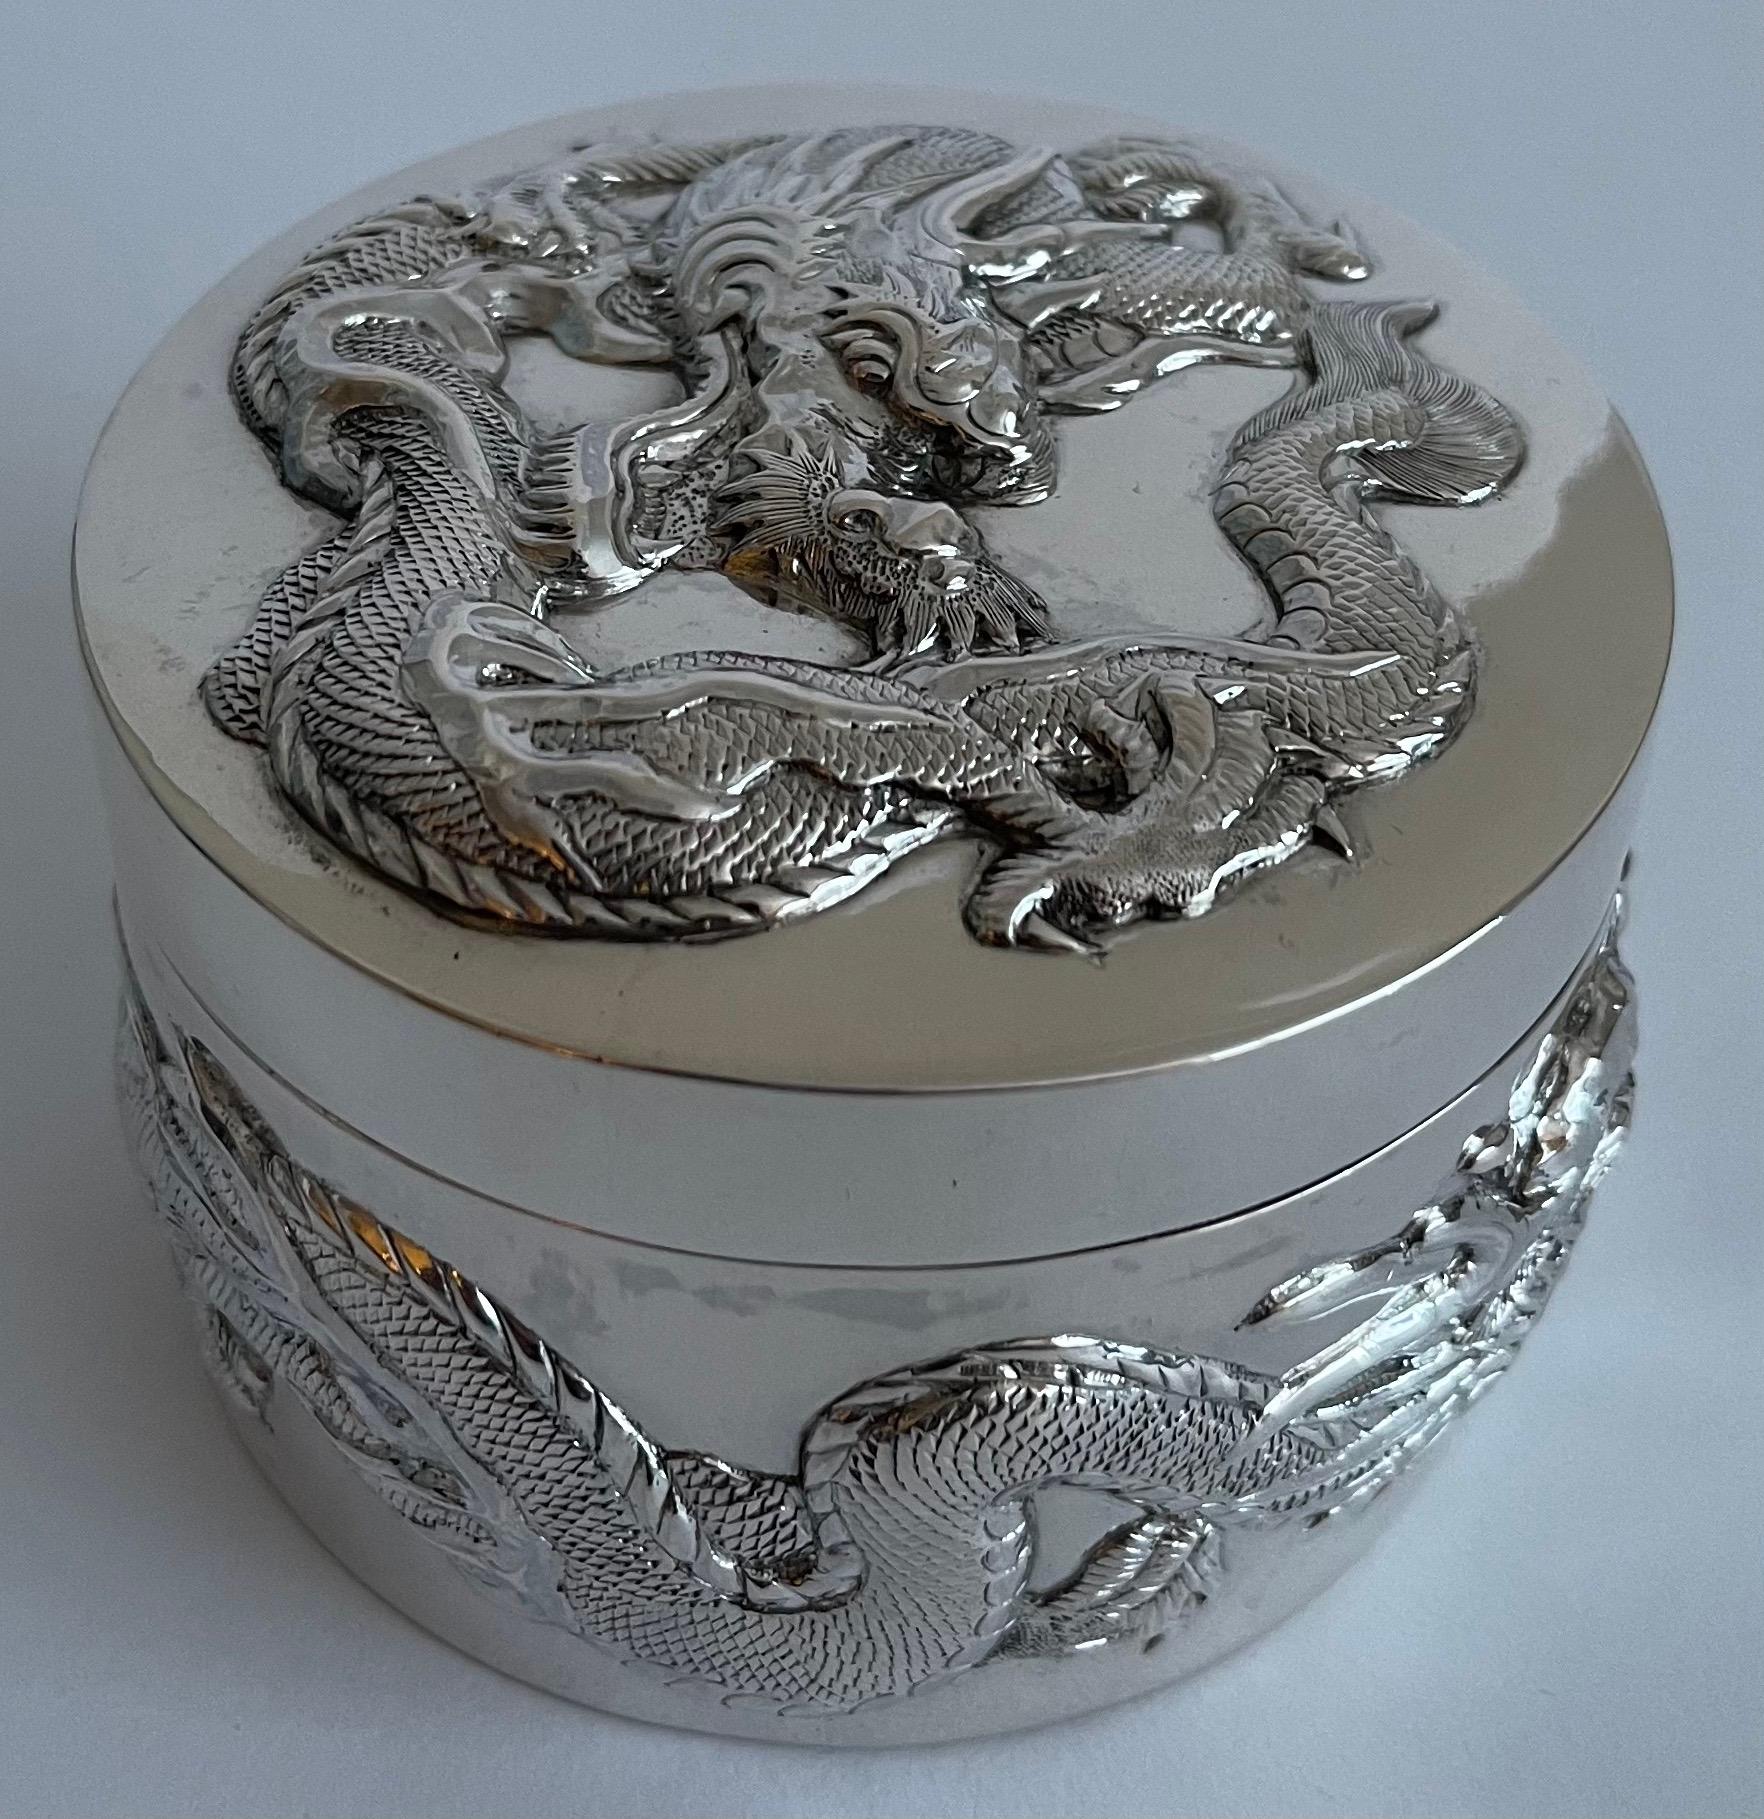 Chinese export silver cylindrical box. Singular writhing repoussè dragon with flames motif wraps around the base. 
The lid of the box features another singular dragon in a whirling position to compliment the circular design. 
Makers mark on the